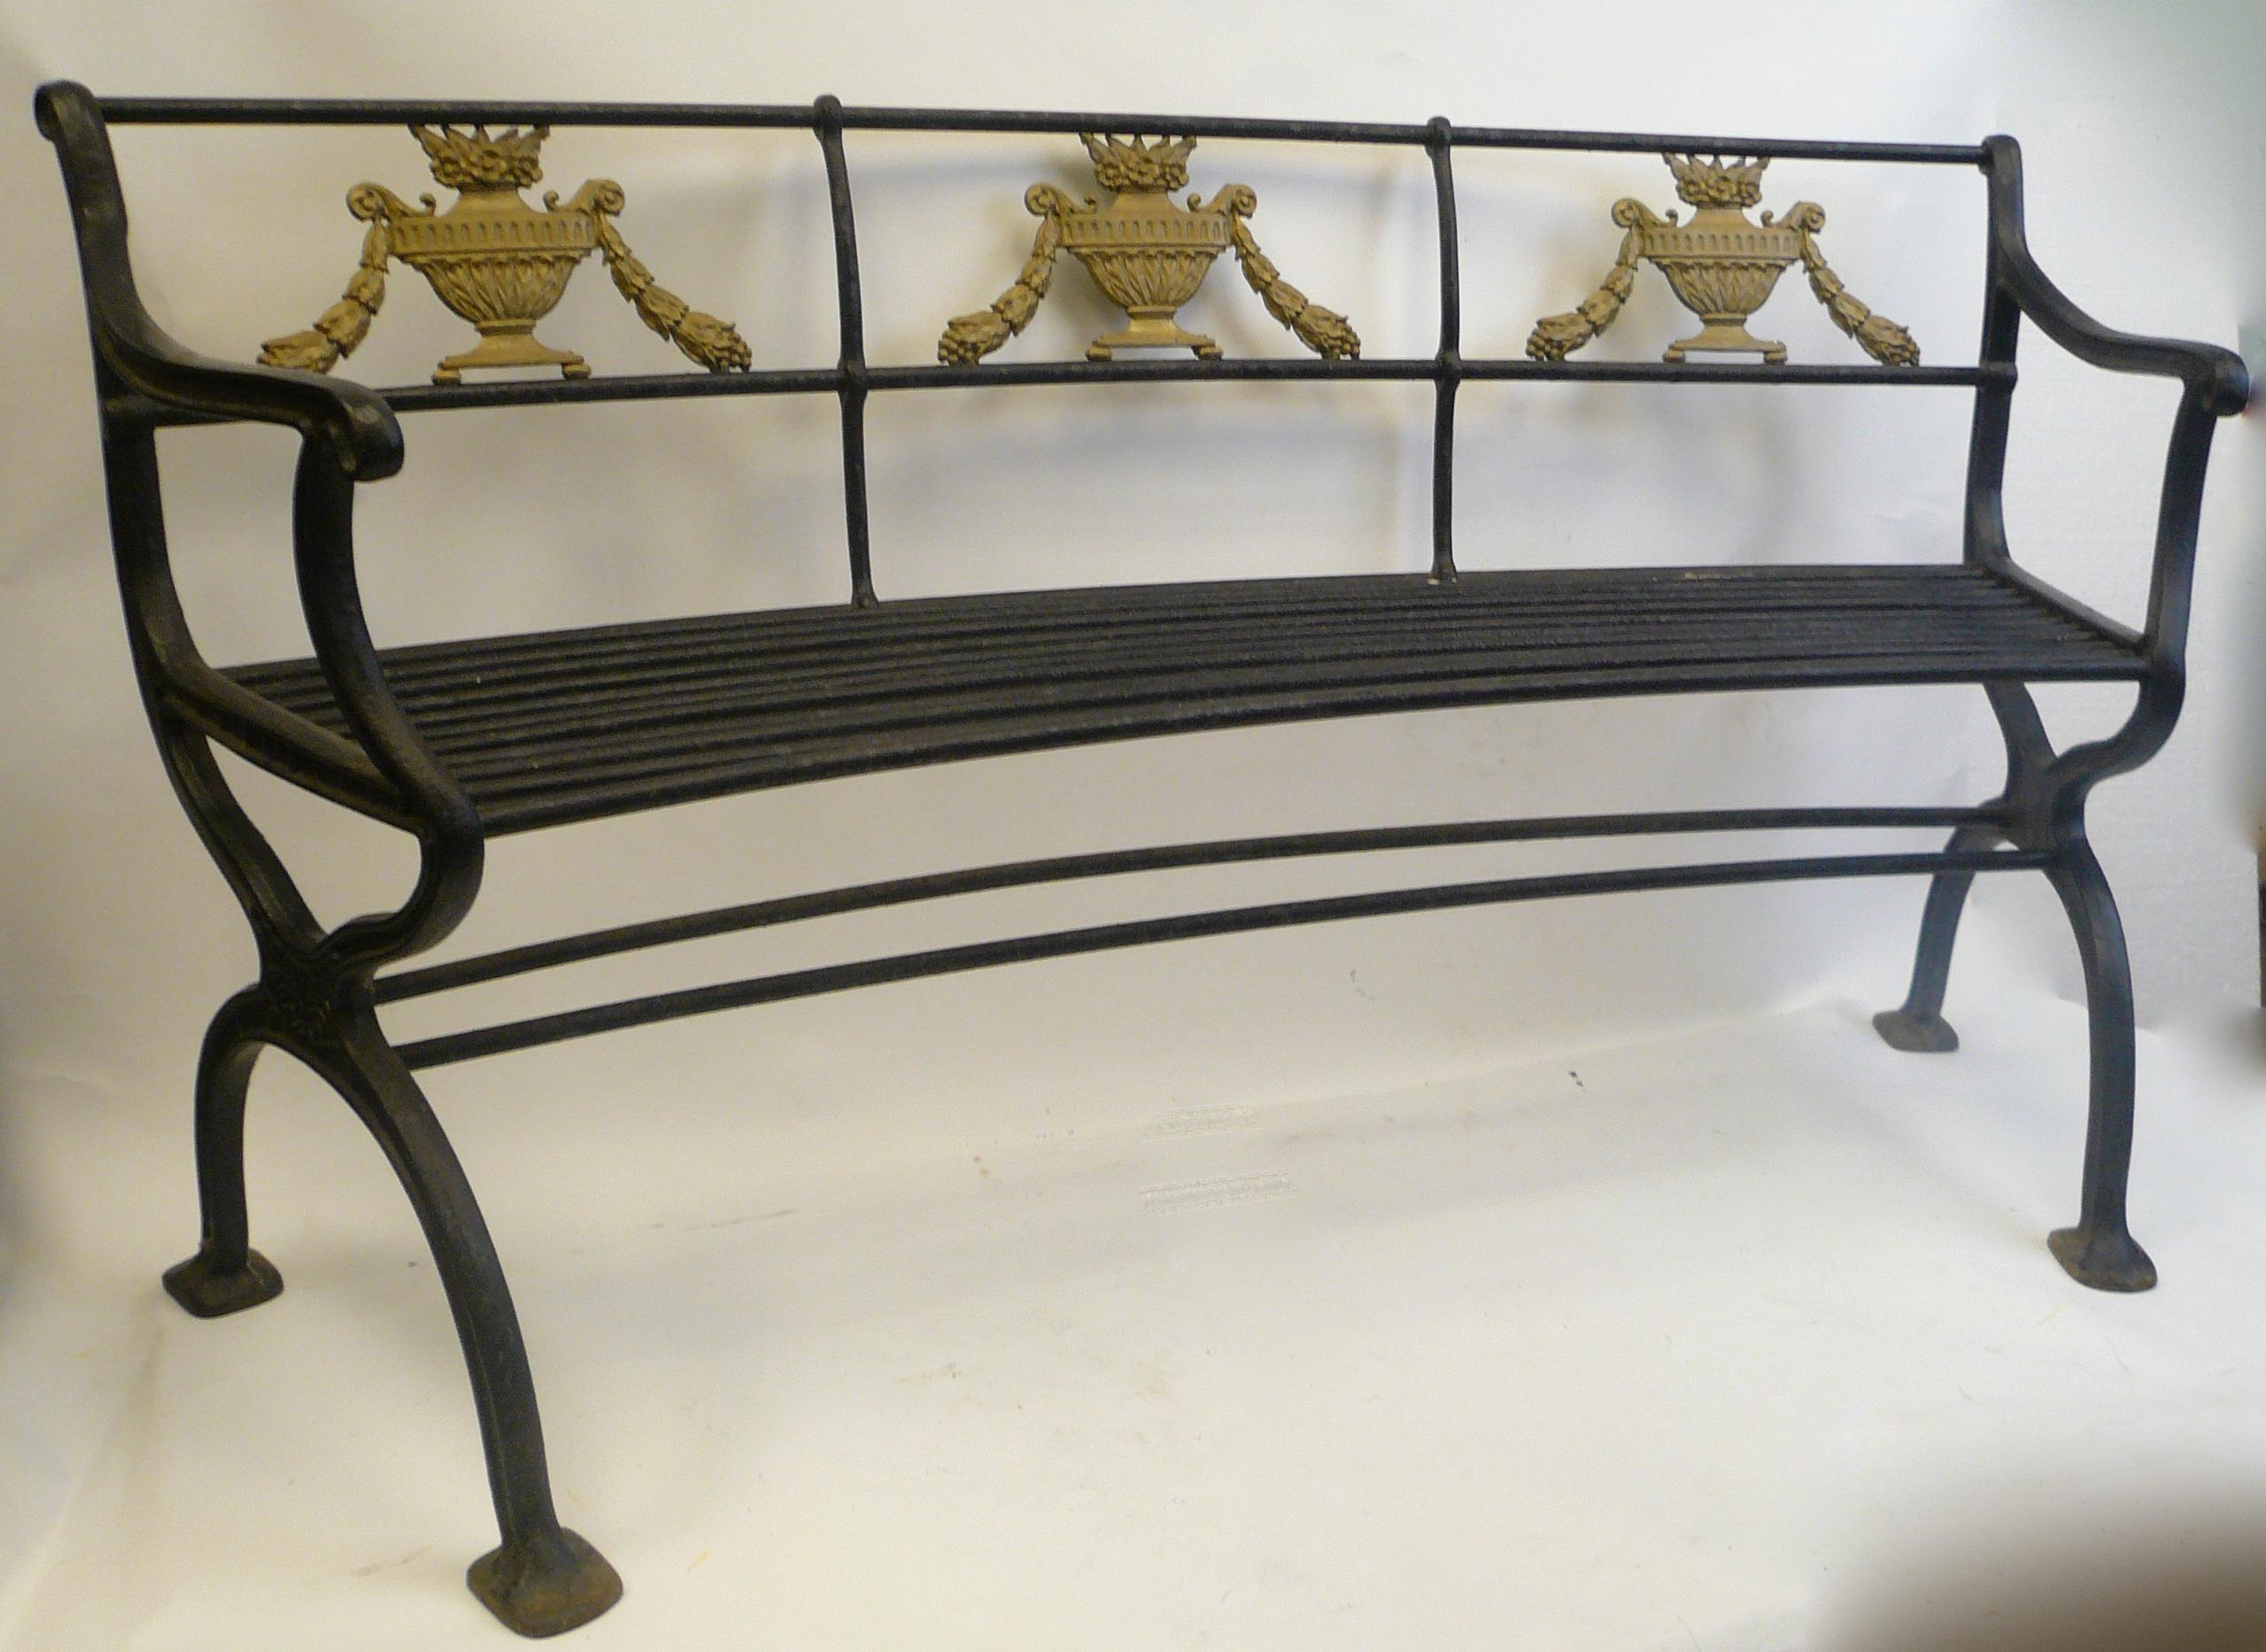 American Pair of Classical Style Cast Iron Garden Benches by W. A. Snow, Boston